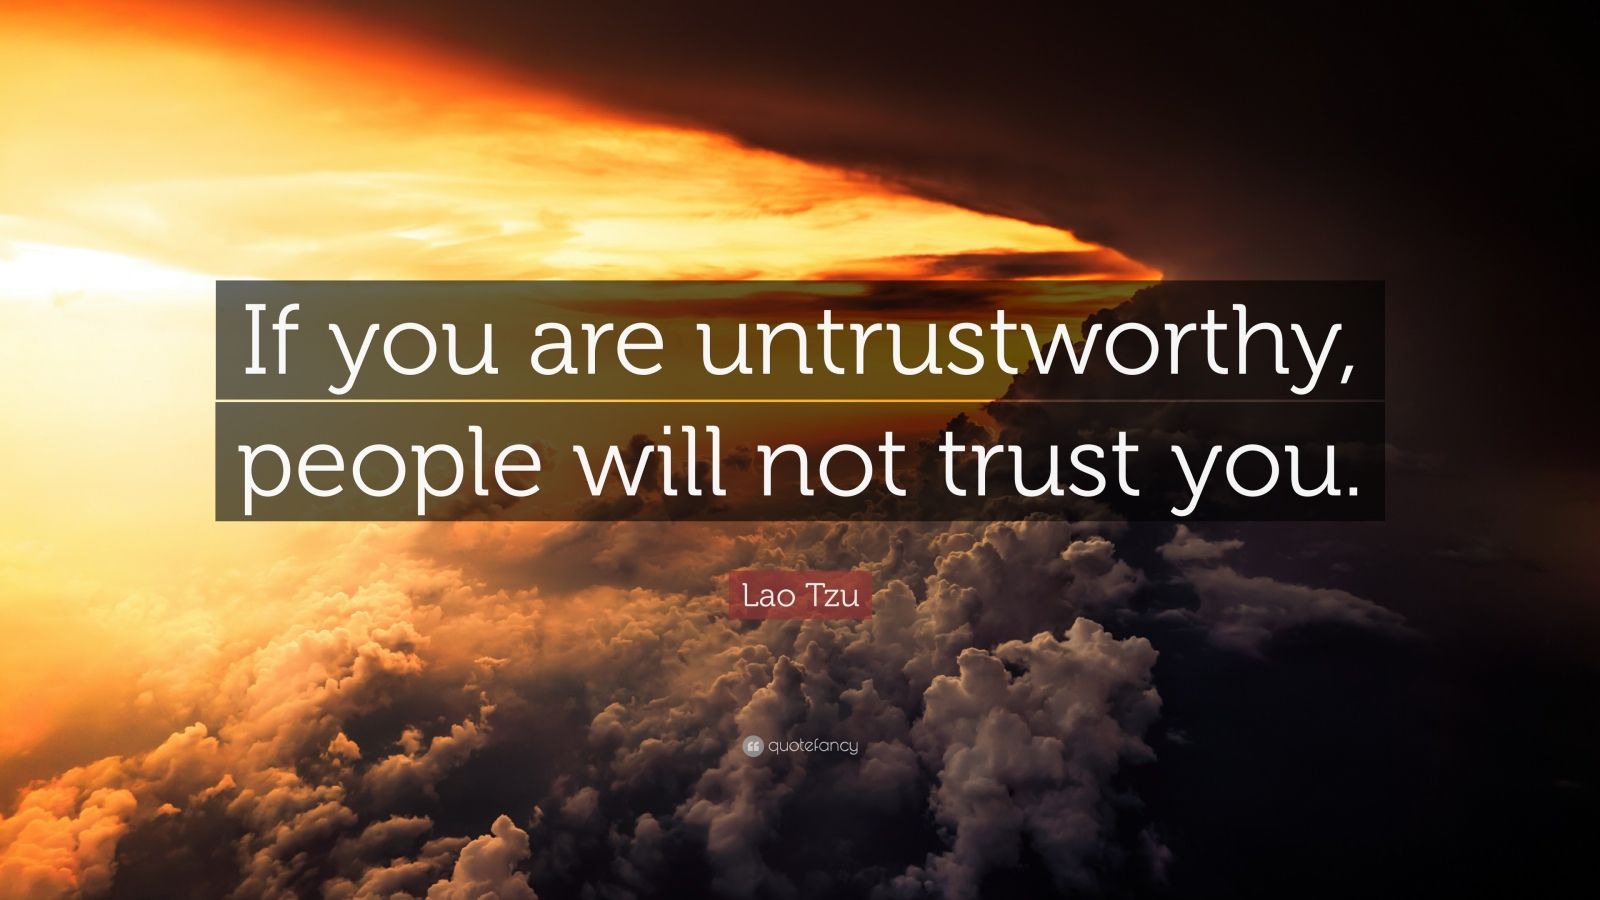 Lao Tzu Quote: “If you are untrustworthy, people will not trust you ...